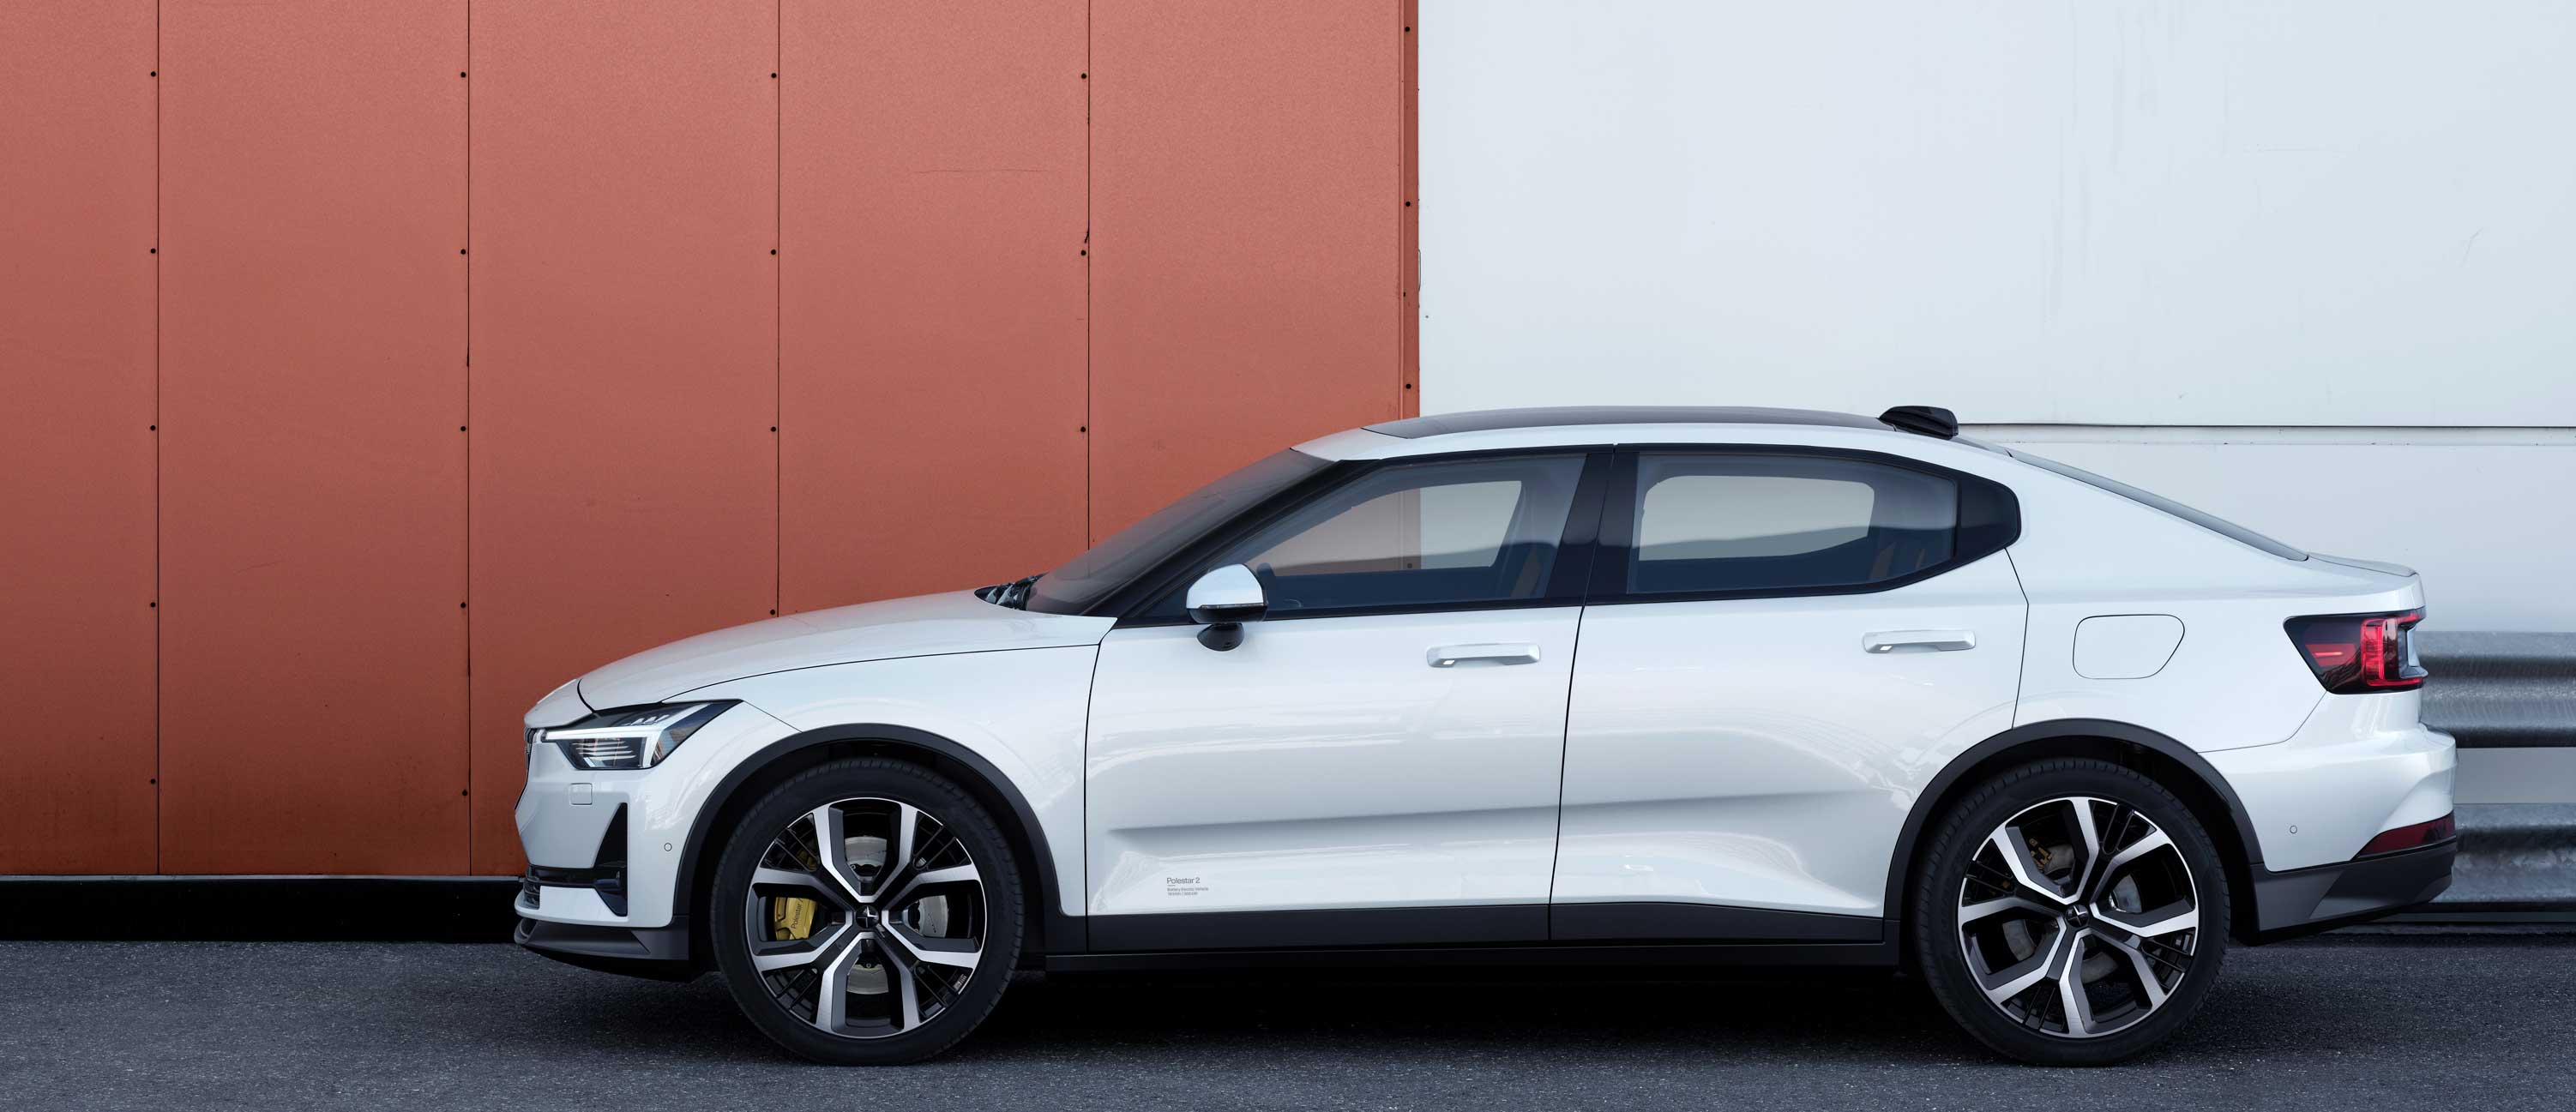 Polestar is the latest electric car company to go public